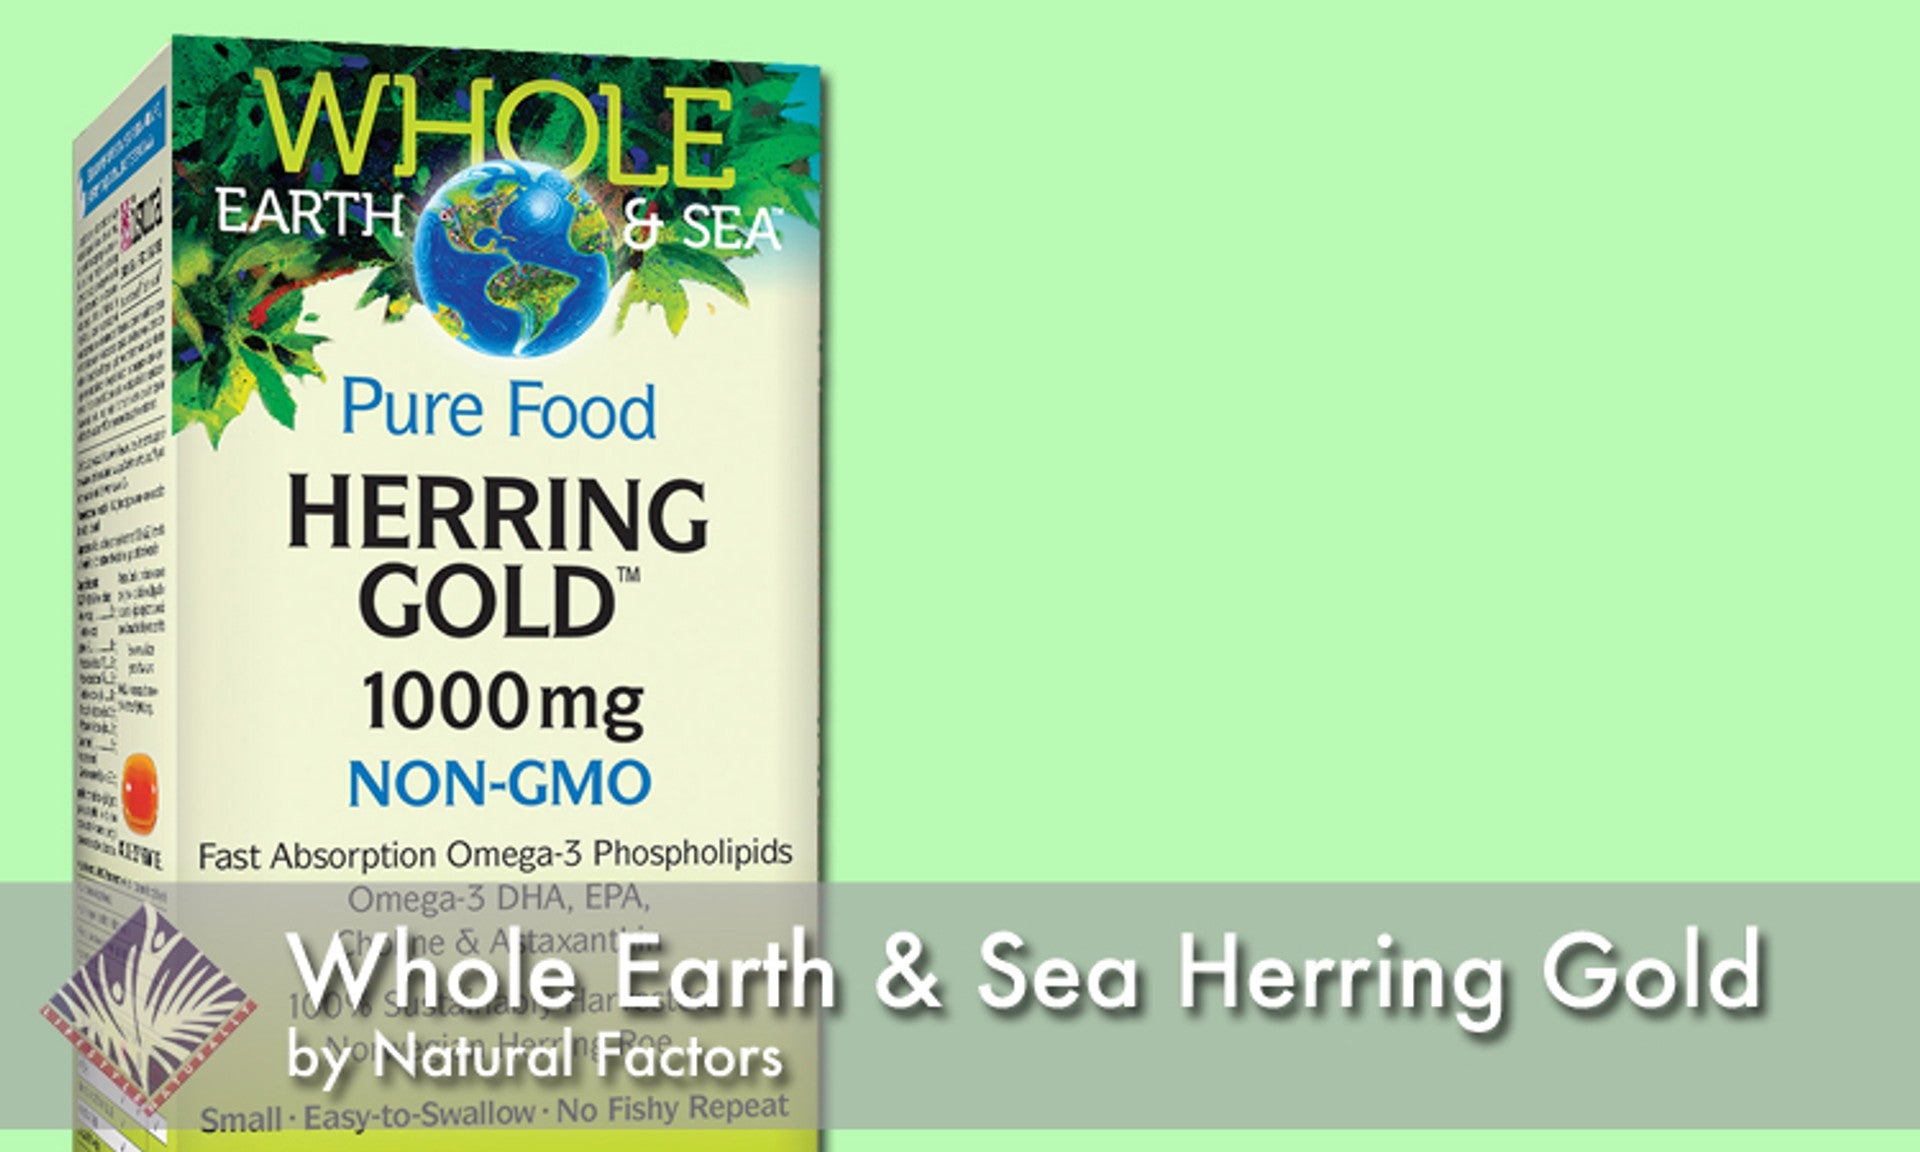 What's the deal with Whole Earth & Sea Herring Gold?